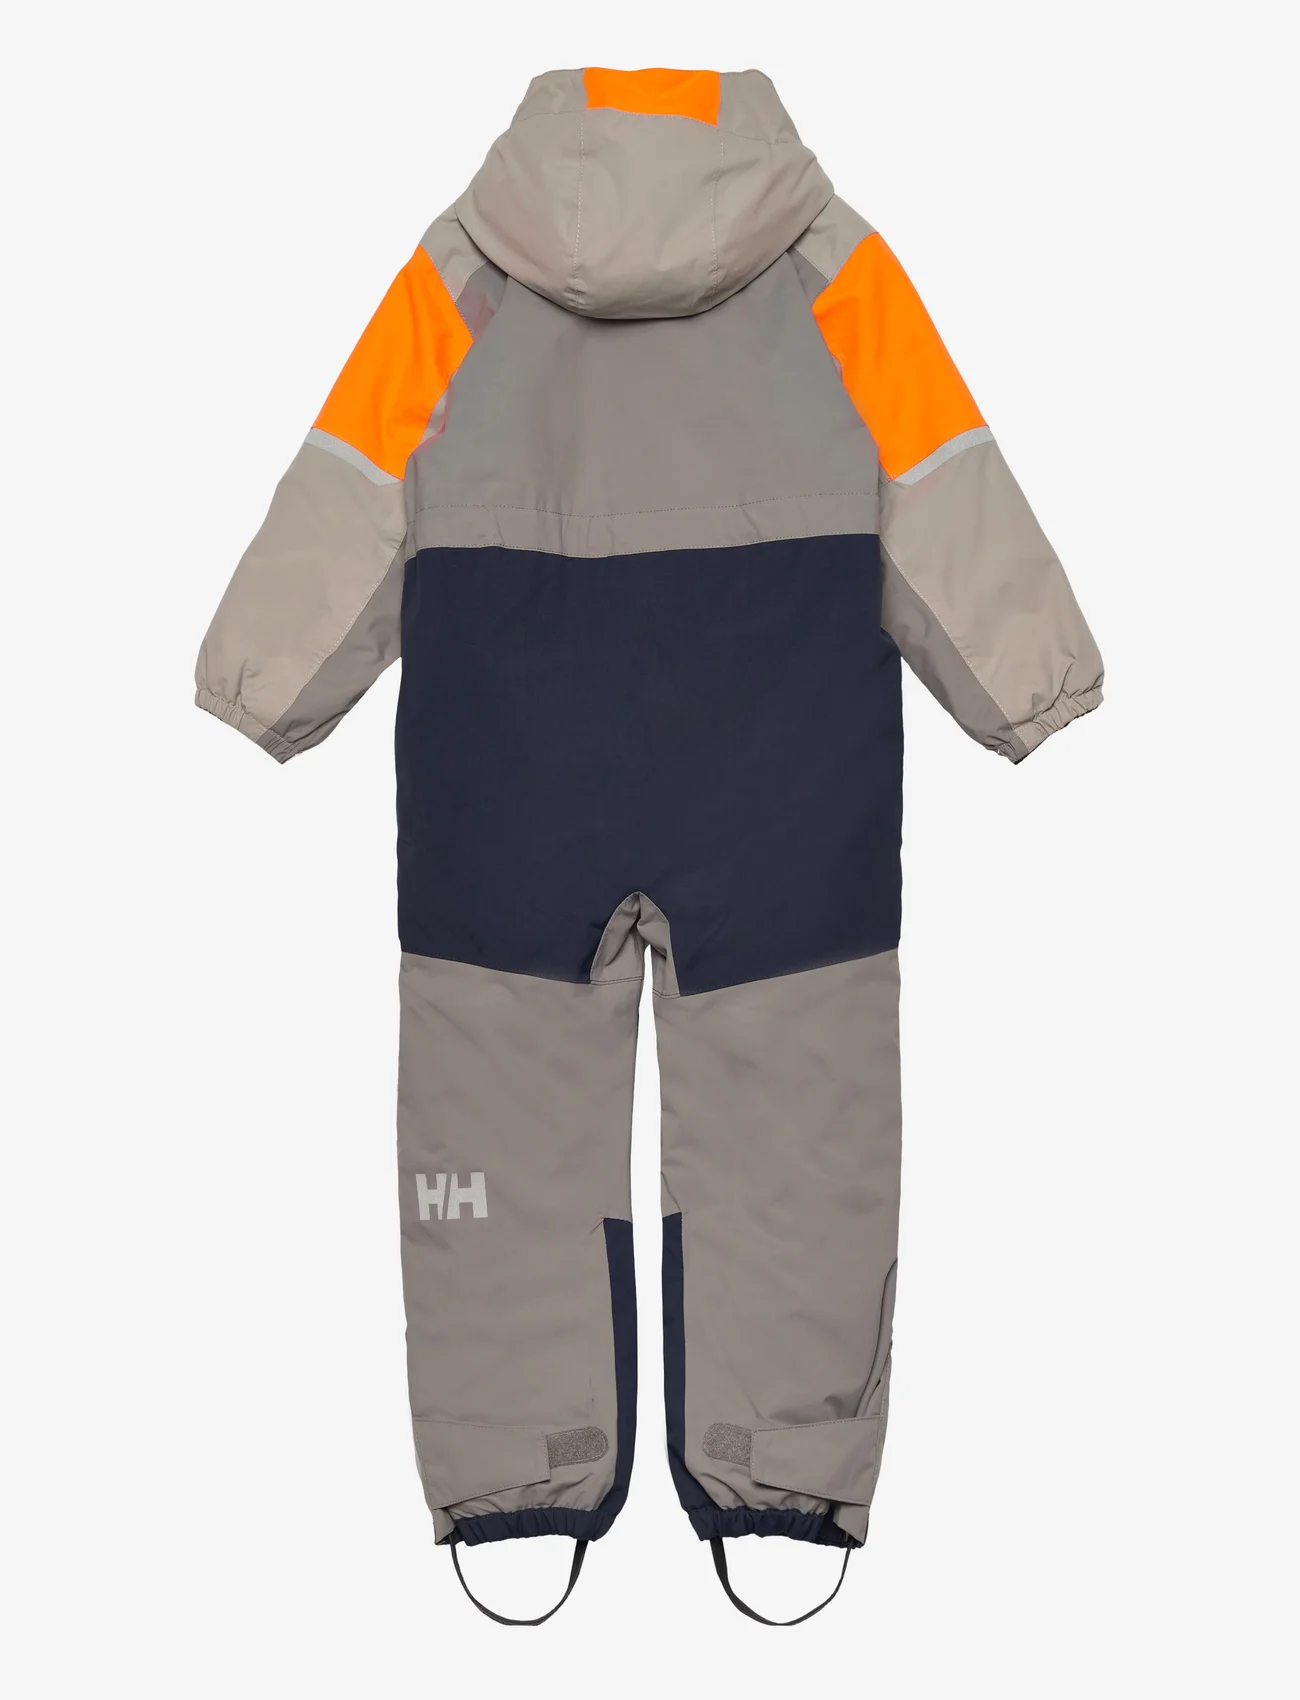 Helly Hansen - K RIDER 2.0 INS SUIT - shell overalls - concrete - 1